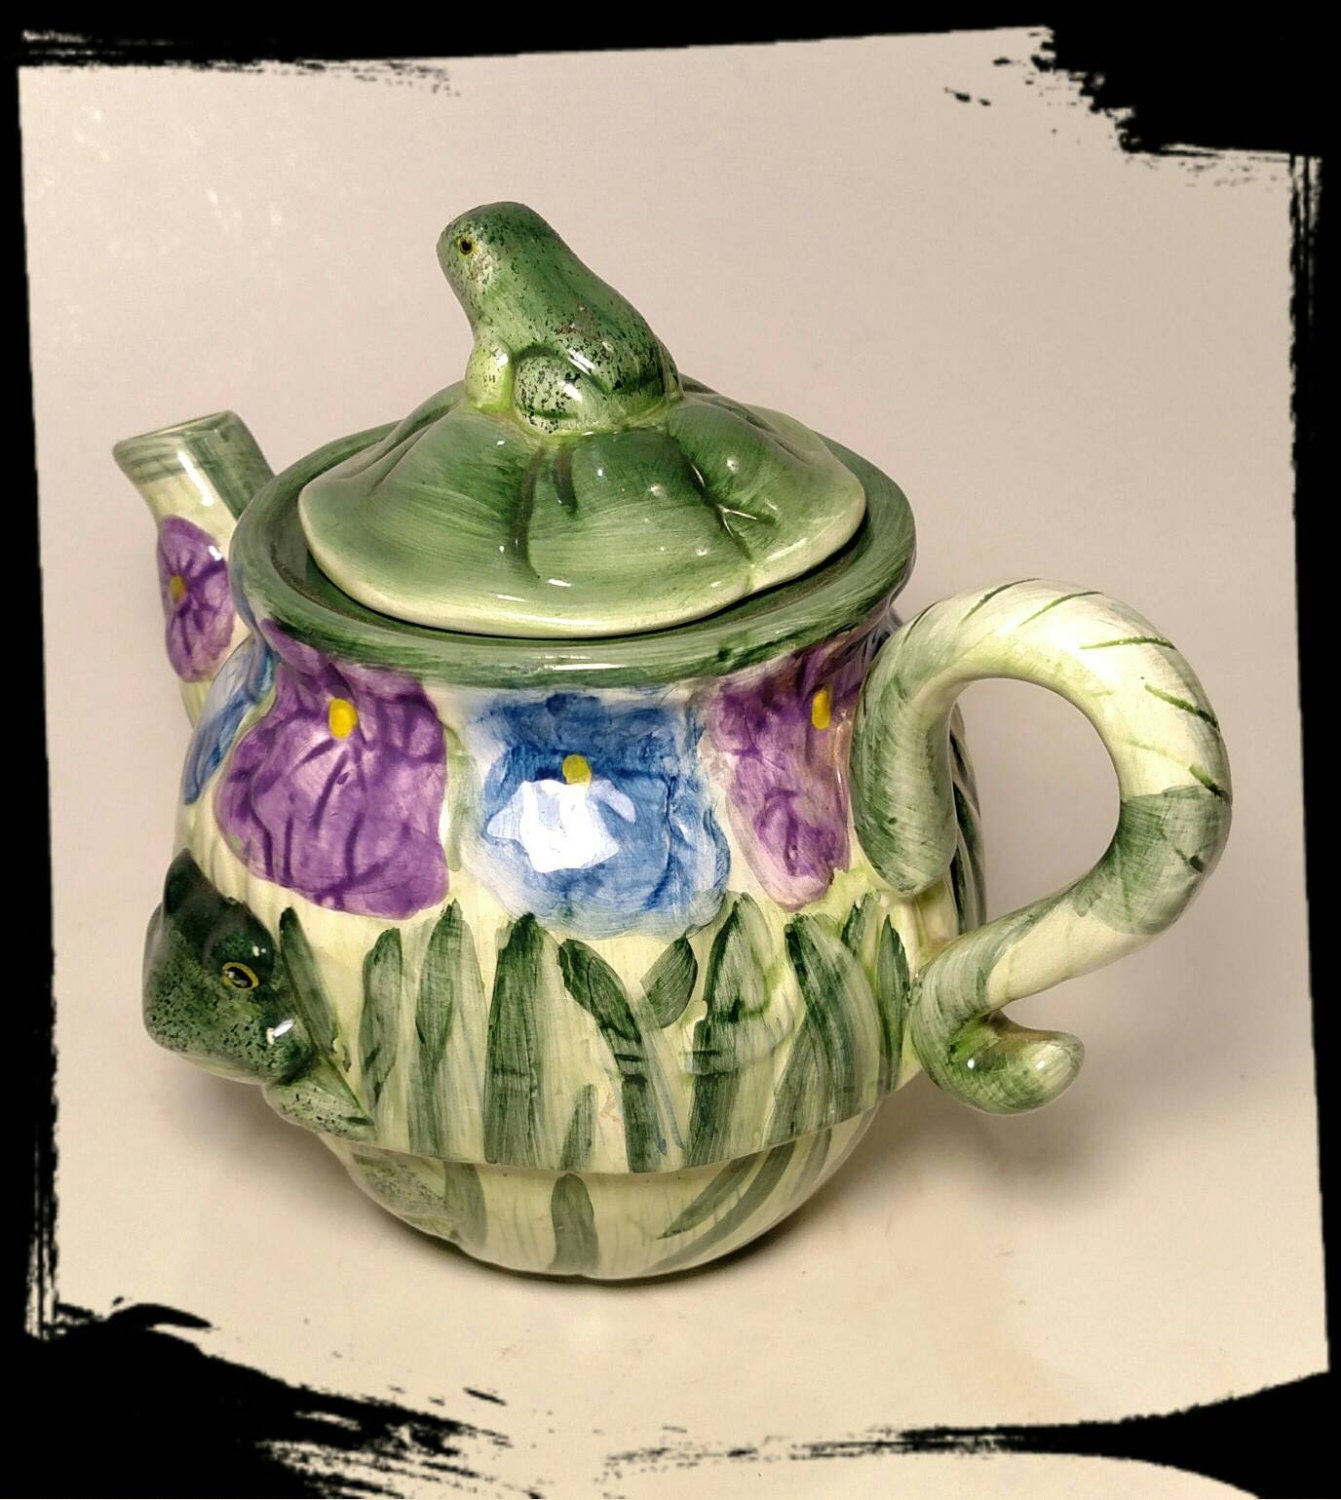 Collectible Teapot Frogs And Flowers Ceramic Tea Pot Green With Frogs